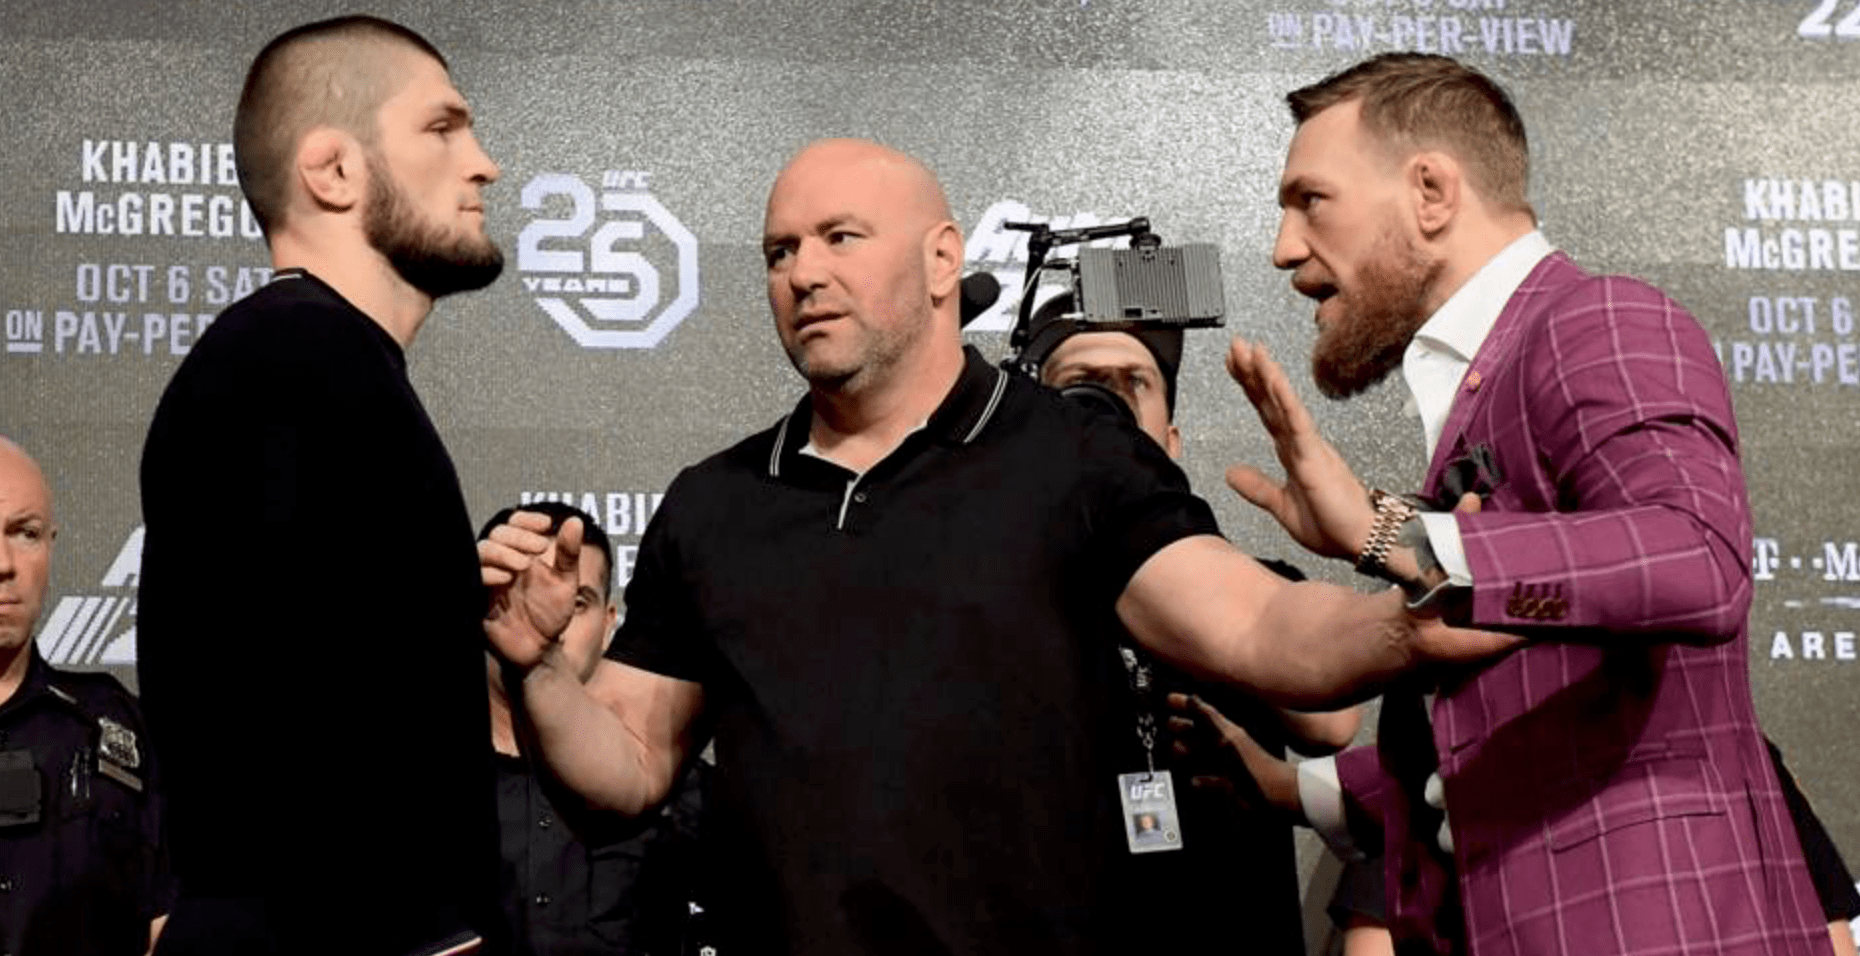 UFC: Khabib Has Got No Joy From Winning Recently, With One Exception